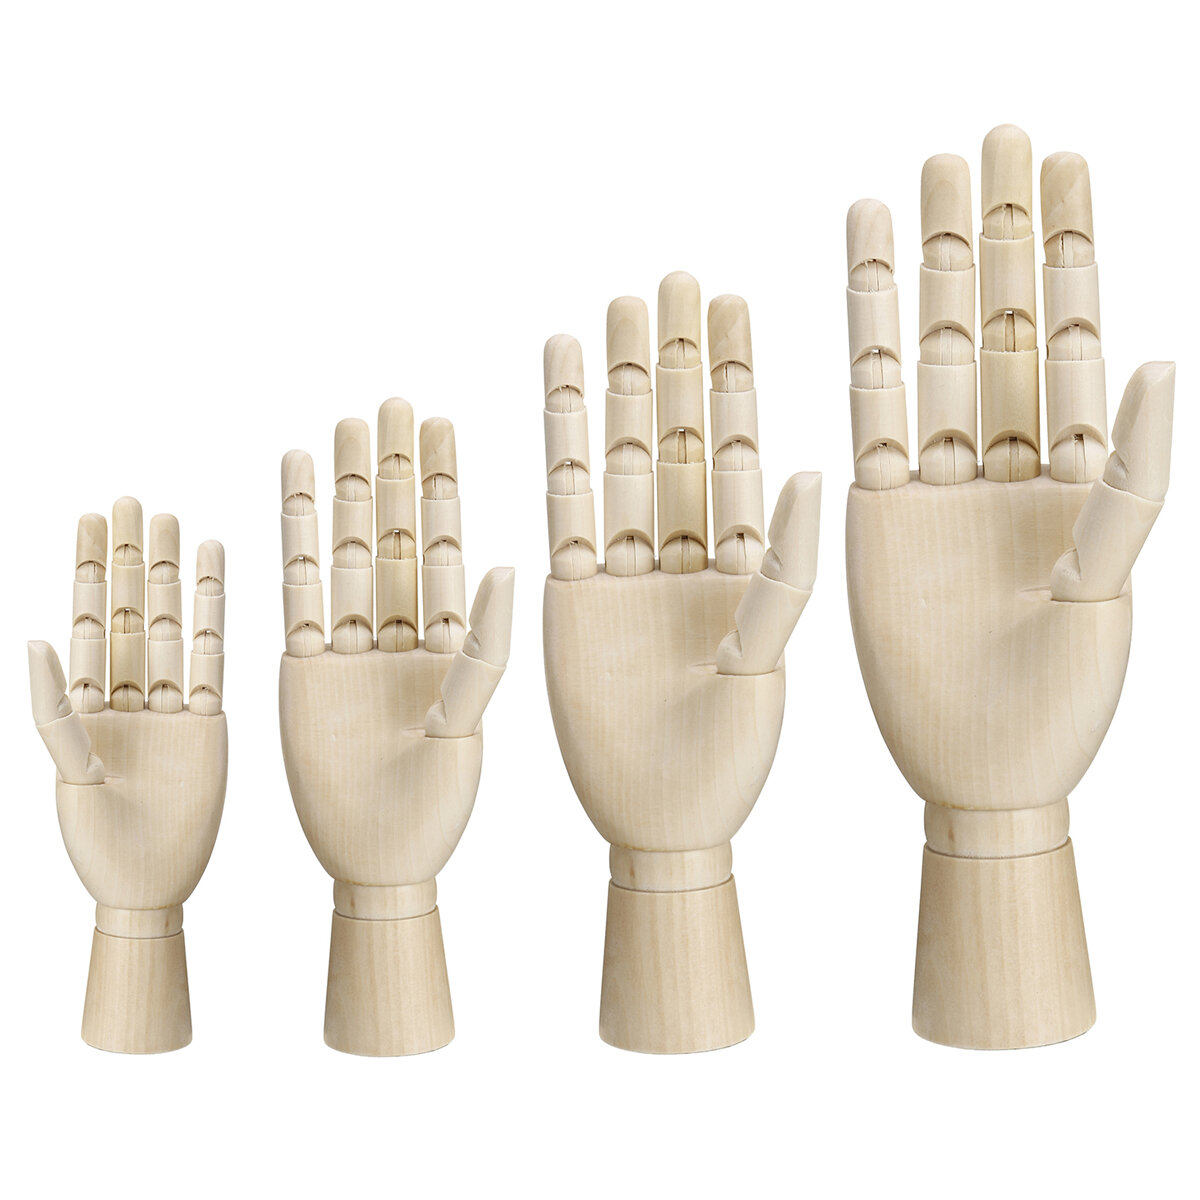 7/8/10/12 Inch Wooden Hand Body Artist Medical Model Flexible Jointed Wood Sculpture DIY Education